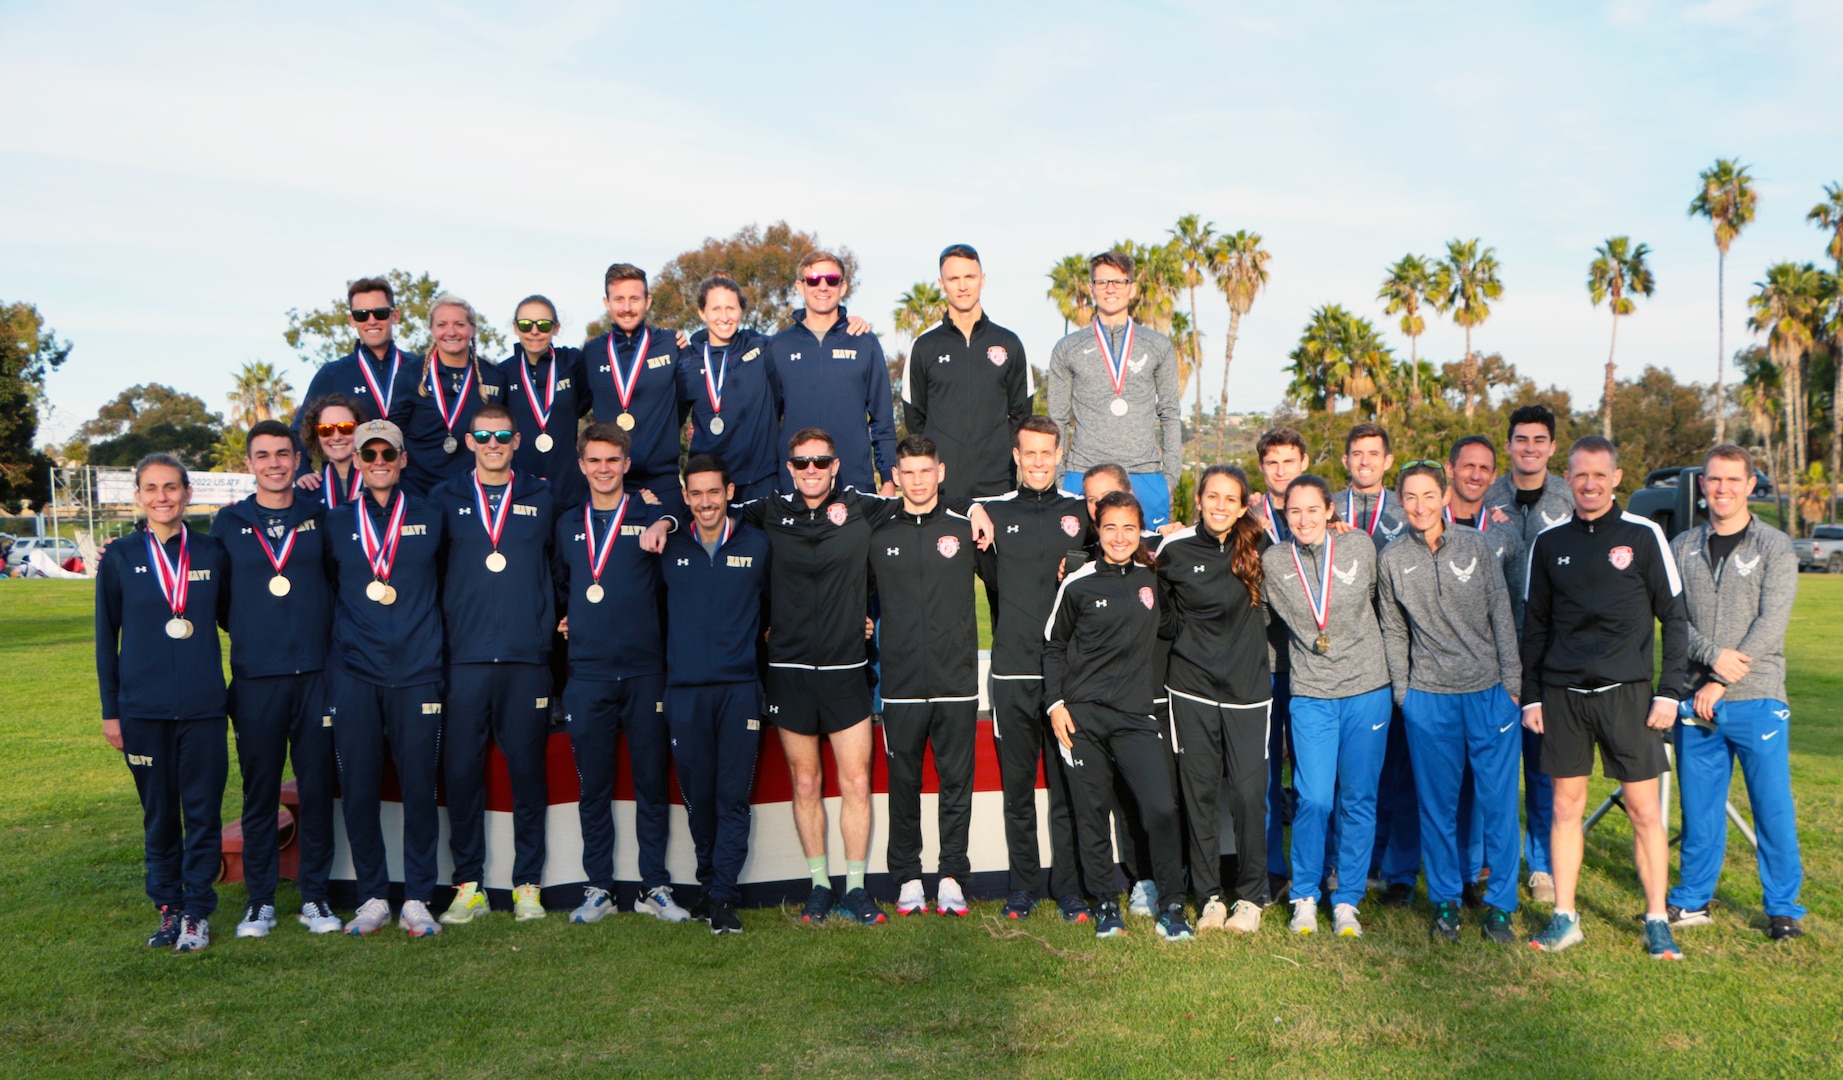 Teams from Navy, Marine Corps and Air Force at the 2022 Armed Forces Cross Country Championship held in conjunction with the USA Track and Field National Cross Country Championship at Mission Bay Park in San Diego, Calif. on January 8th.  Runners from the Marine Corps, Navy (with Coast Guard) and Air Force compete for gold.  (Department of Defense Photo - Released)